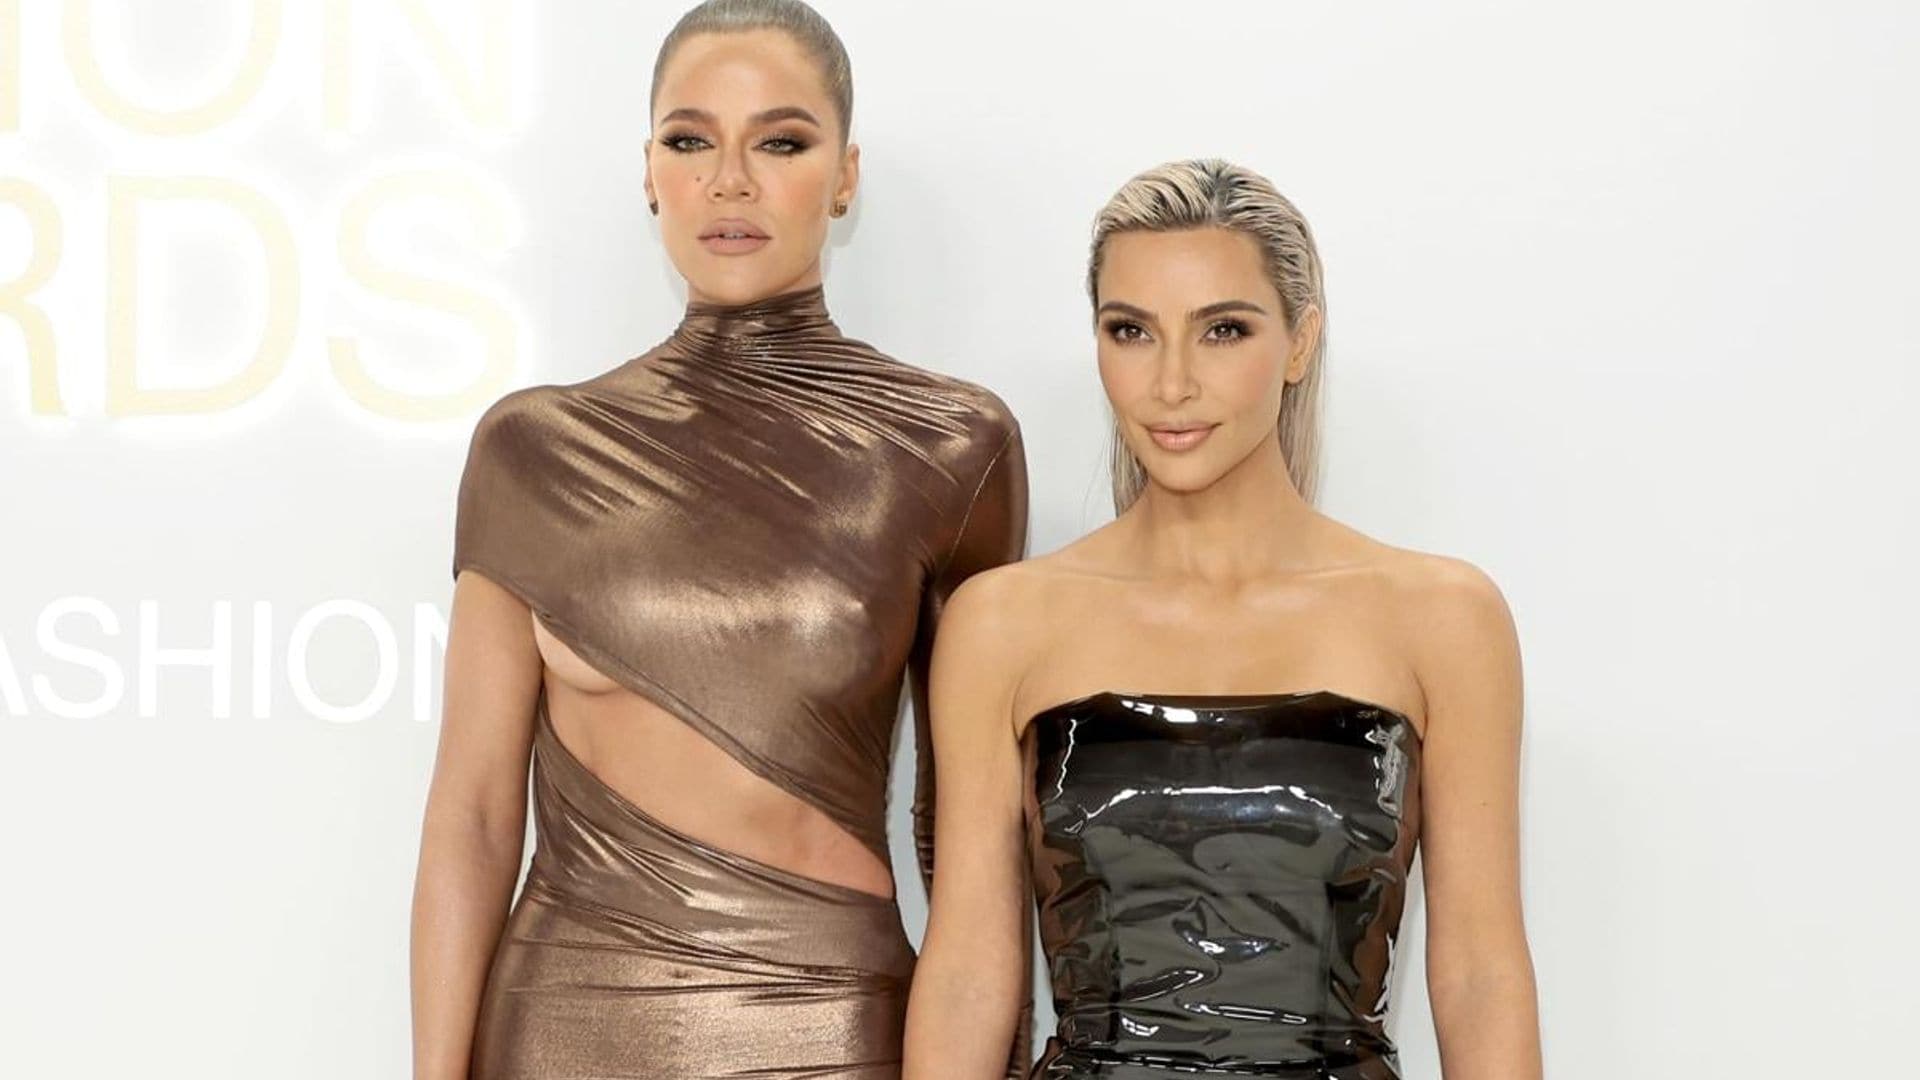 Kim and Khloé Kardashian react to Caitlyn Jenner’s comments: ‘It hurts me too’